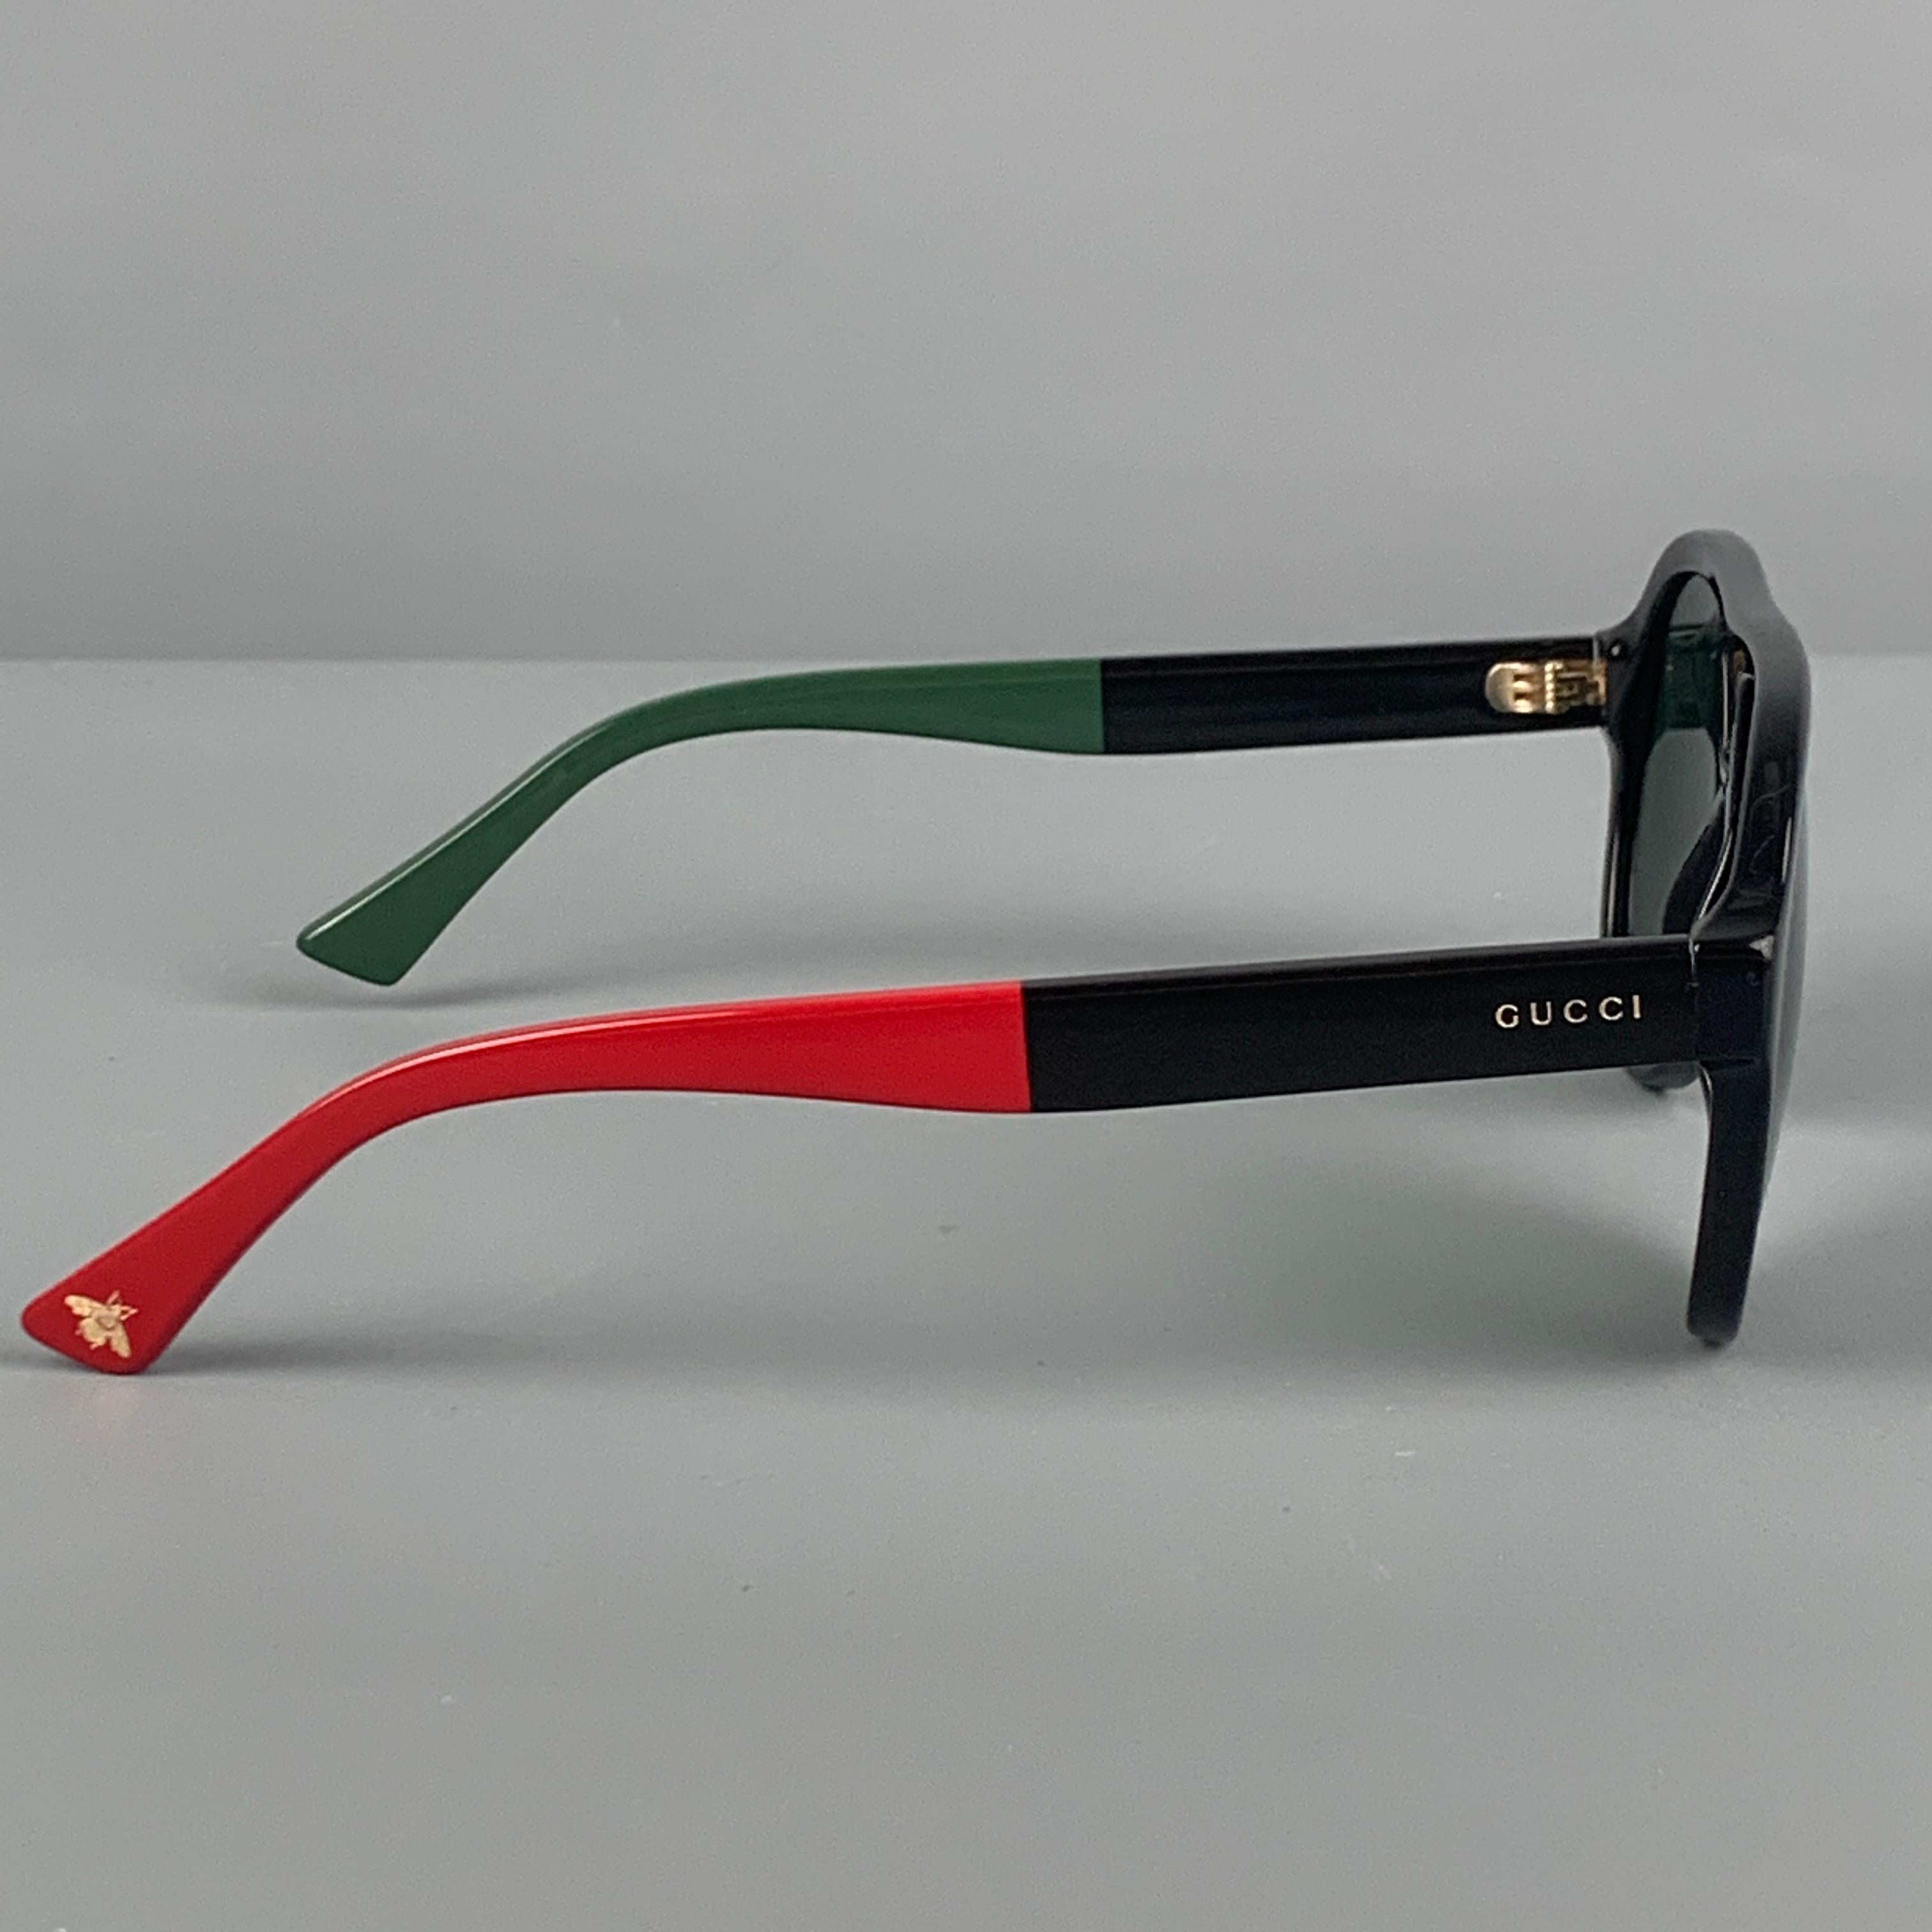 GUCCI sunglasses comes in a black acetate with a red & green color block design featuring a aviator style and tinted lenses. Made in Italy. 

Very Good Pre-Owned Condition.
Marked: GG0159S

Measurements:

Length: 5.5 in.
Height: 2.25 in. 